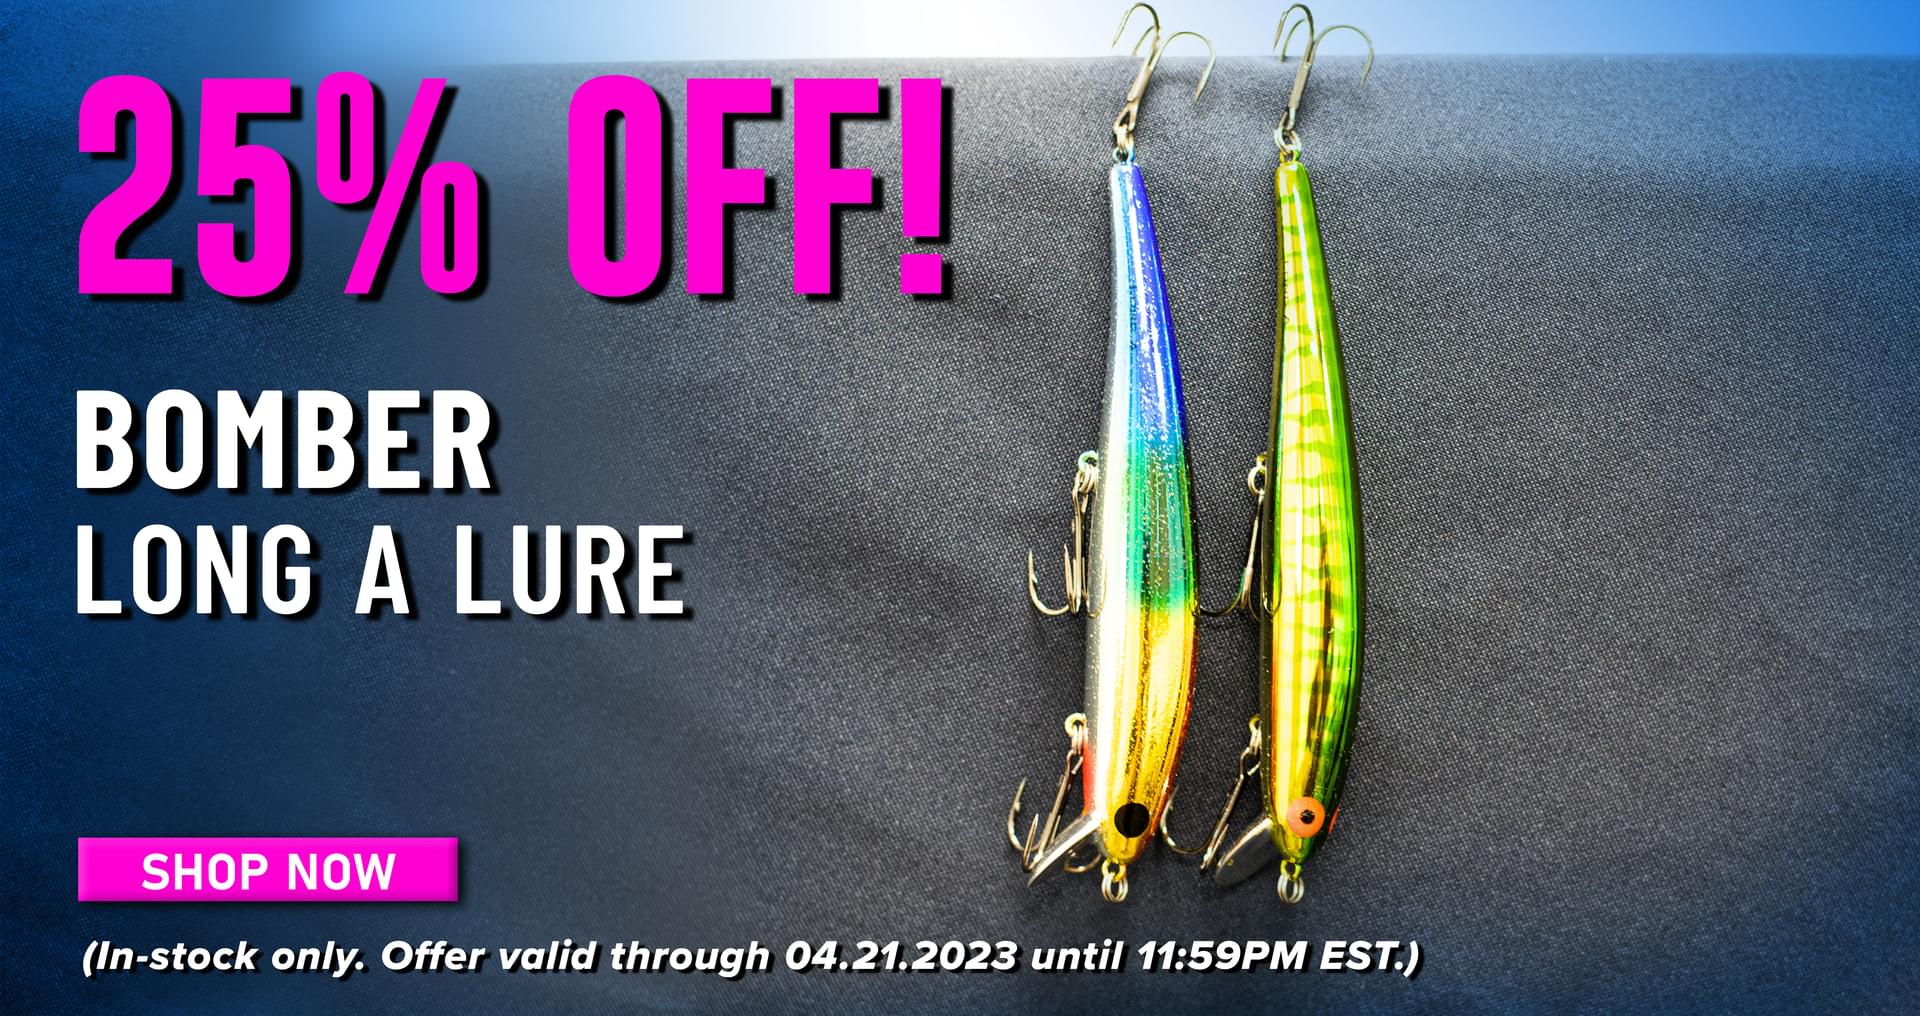 Buy 1, Get 1 Free Northland Rumble Bugs is Ending Soon! - Fish USA